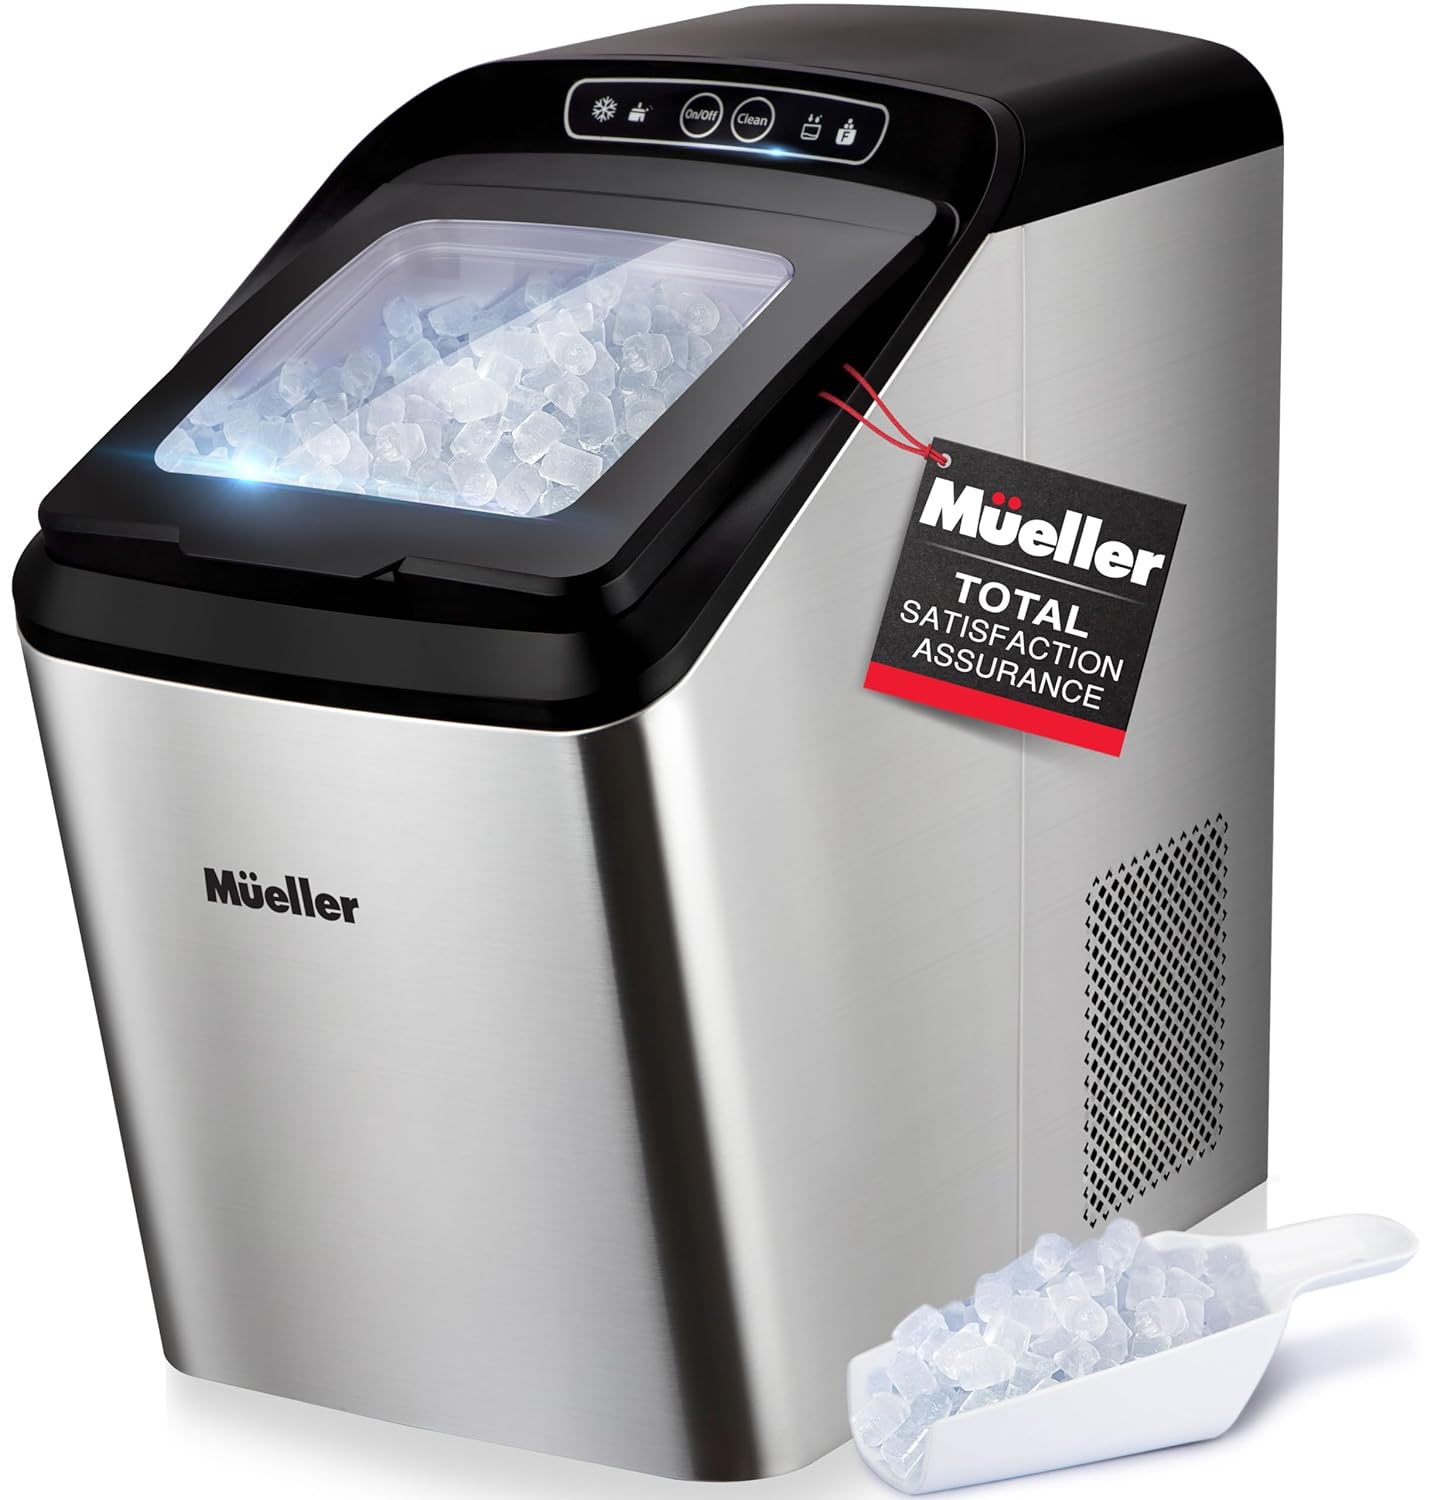 Ive had this ice maker for a few months now and its been great. I love the size of the pellets and they are soft enough to crunch without damaging your teeth. Kind of like Sonic ice. I keep it unplugged when we dont need ice and when I start it back up to replenish, it makes a good amount of ice within 30 minutes or so. So I am happy with the speed. The ice maker makes a hum noise that is to be expected for an ice maker but is not loud enough to interfere with conversation or tv watching. The